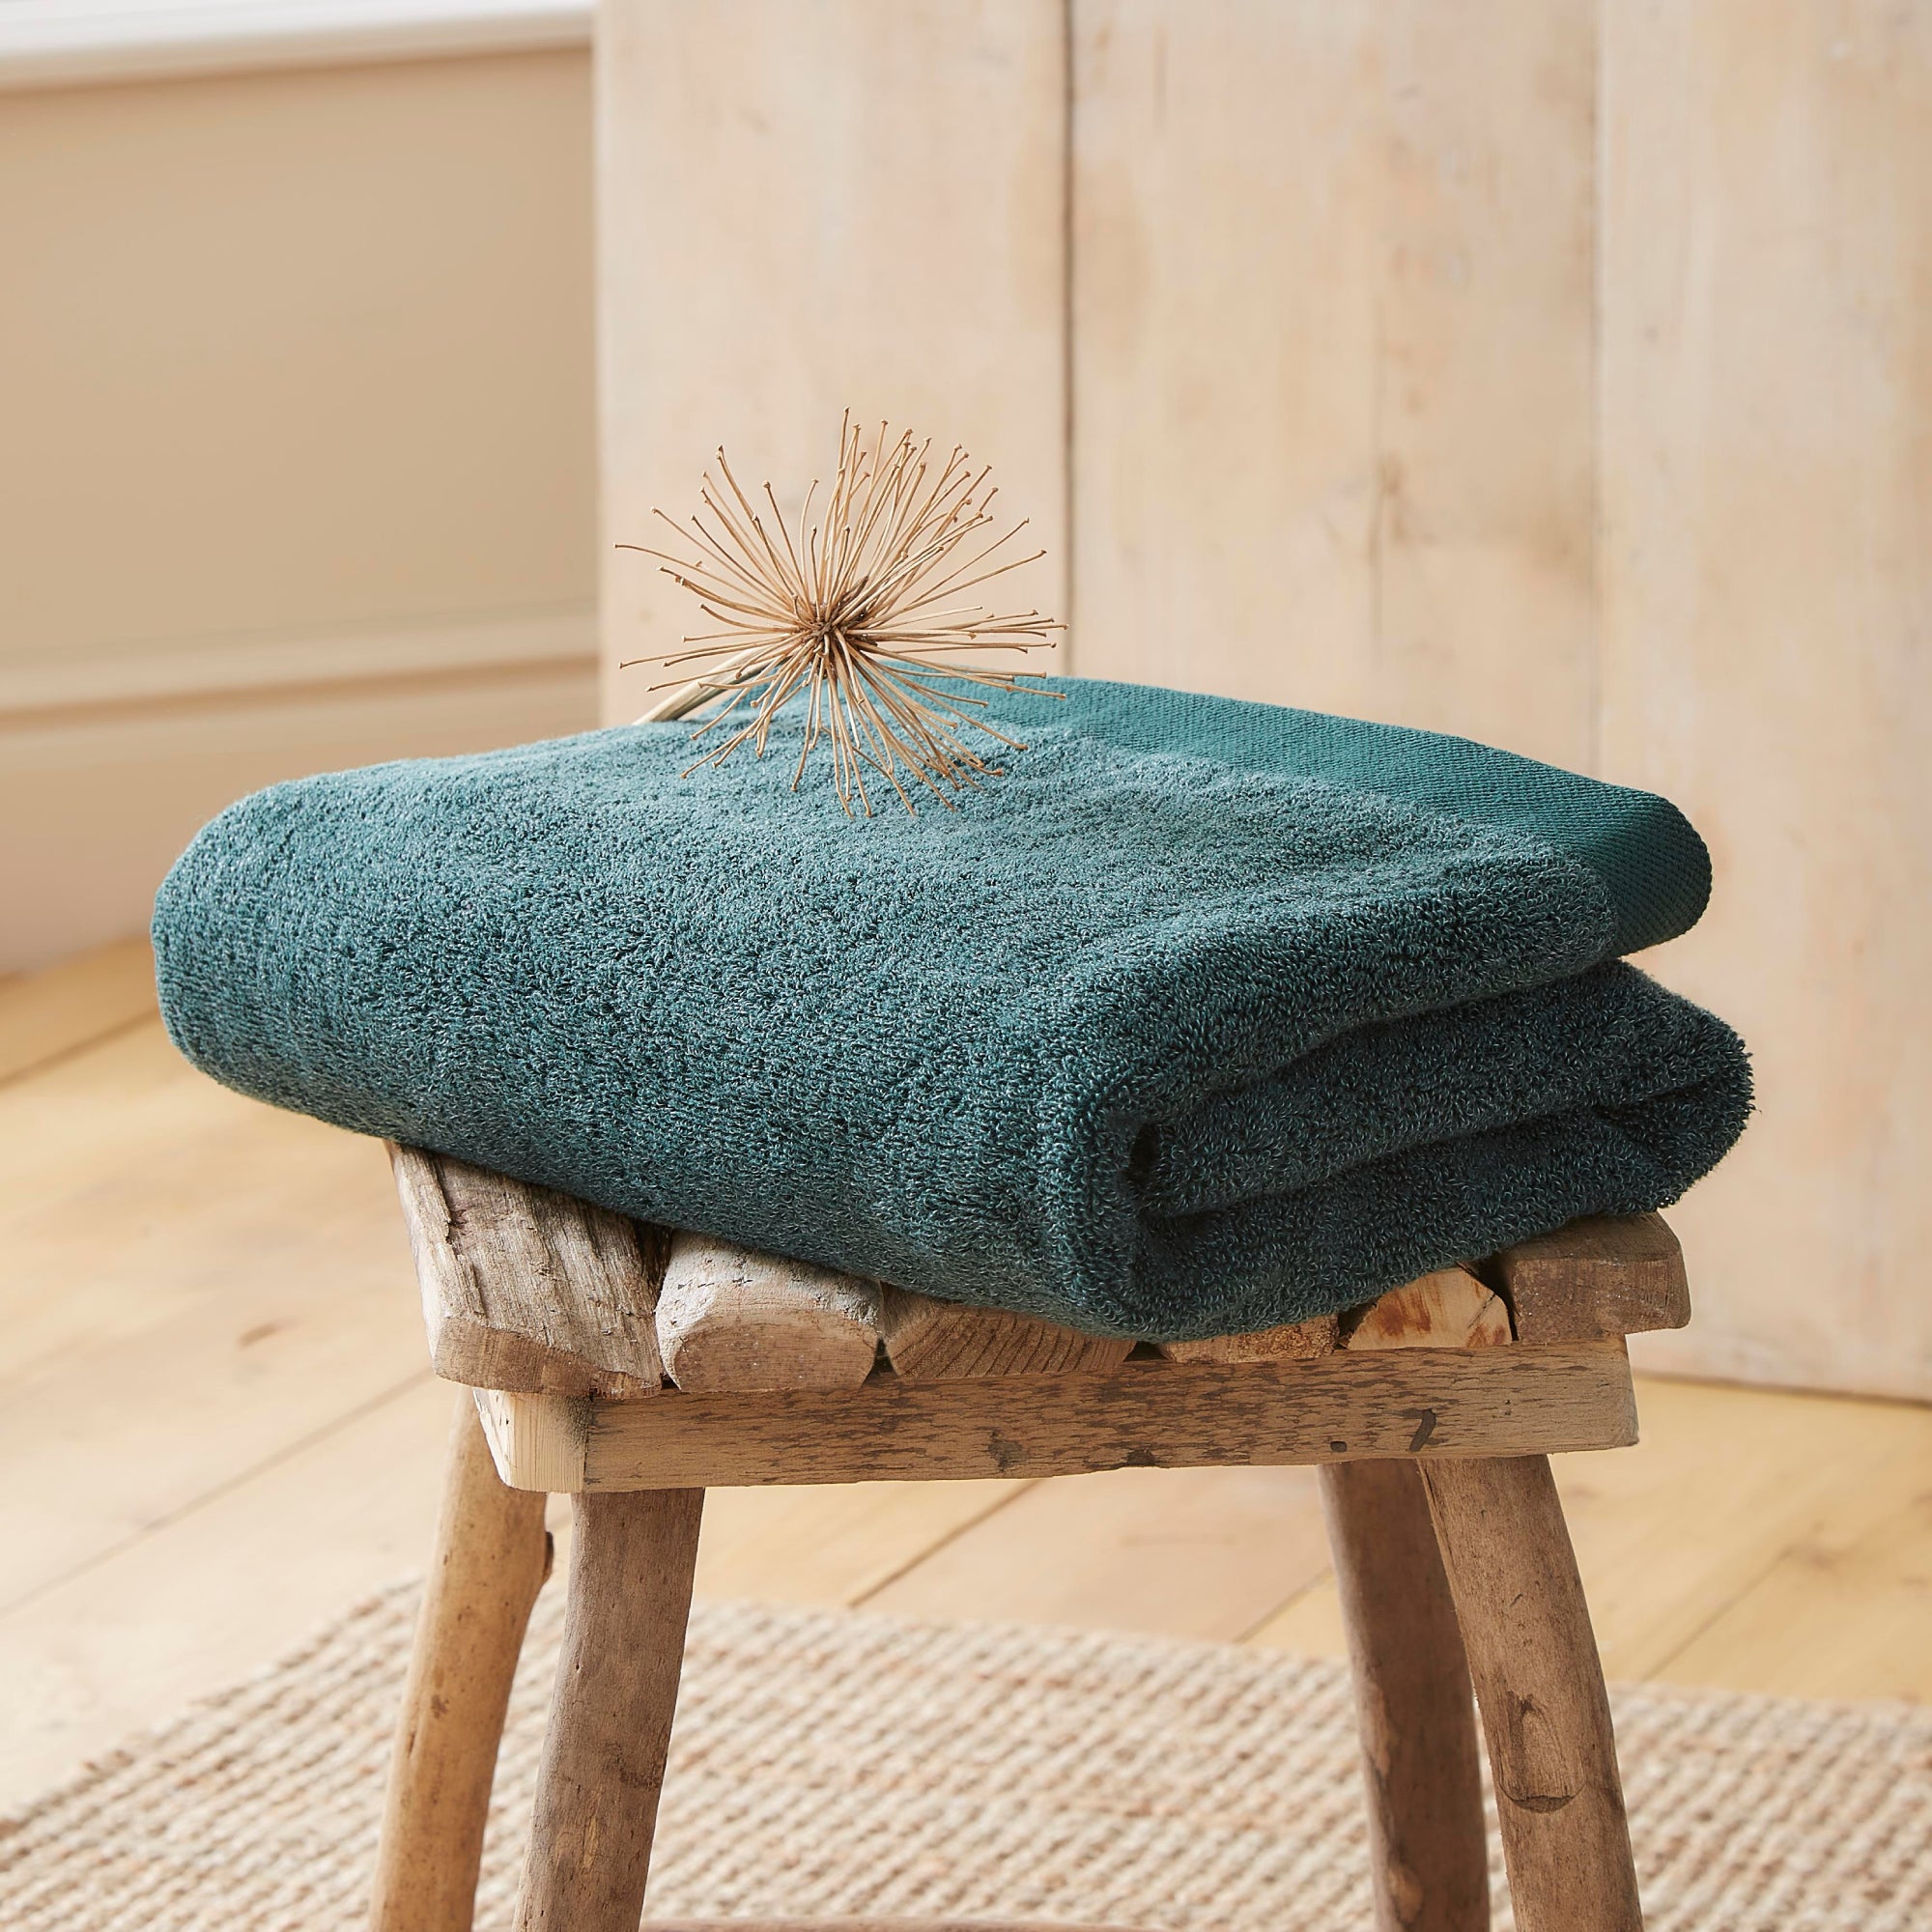 Hand Towel Abode Eco by Drift Home in Deep Green